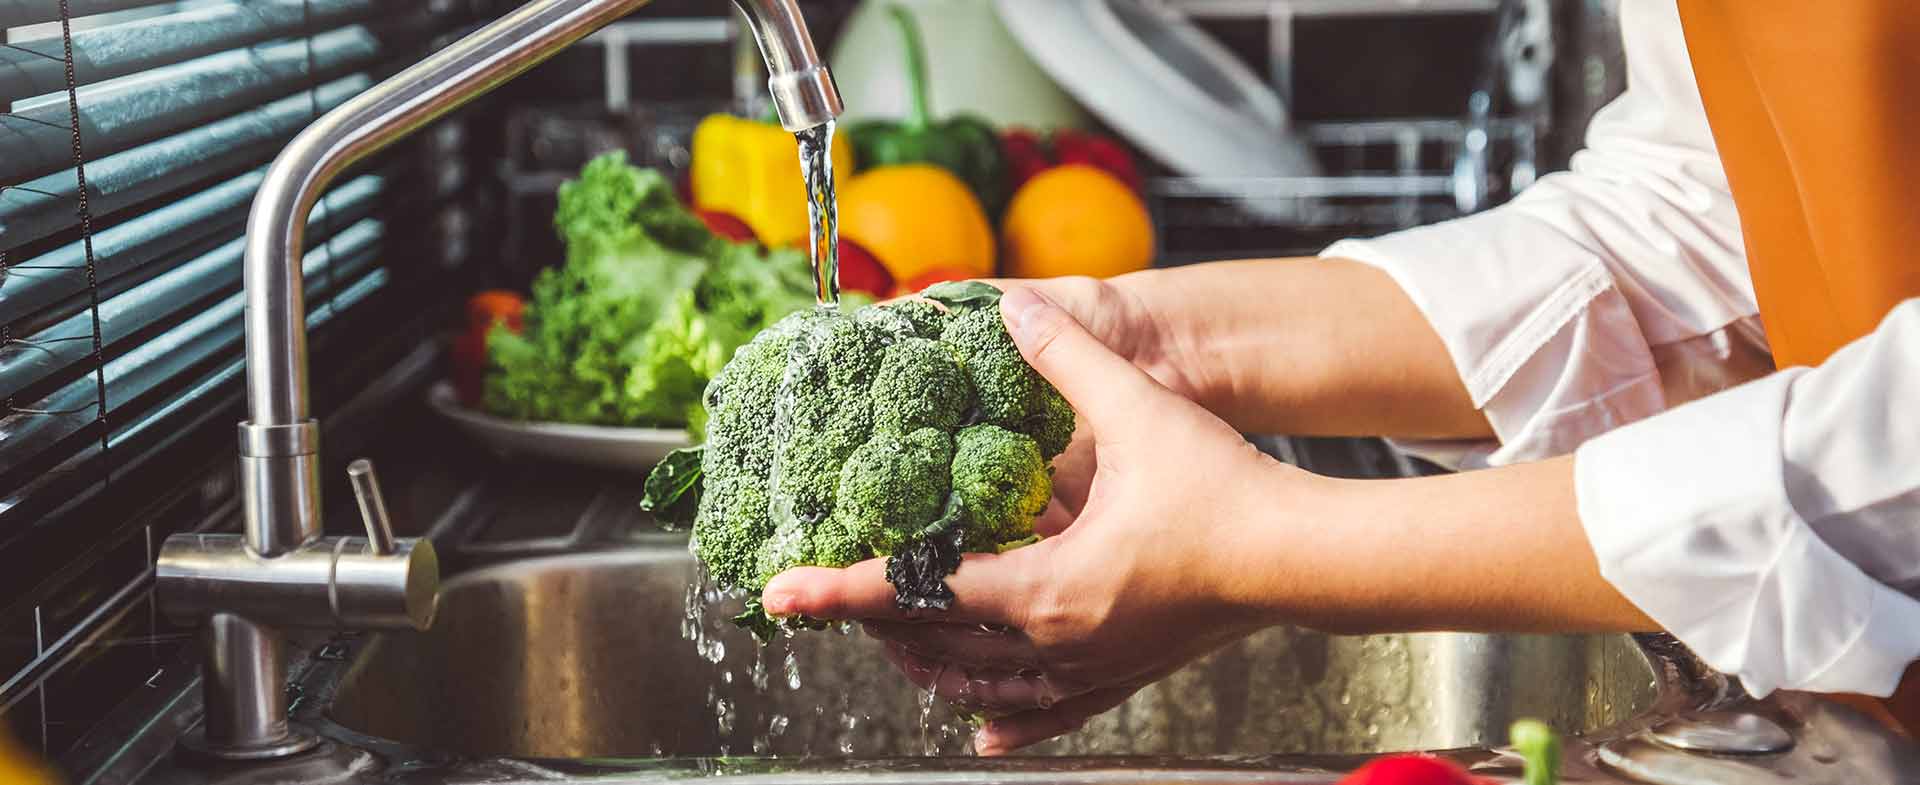 How to Wash Fruits and Vegetables Effectively So They're Safe to Eat